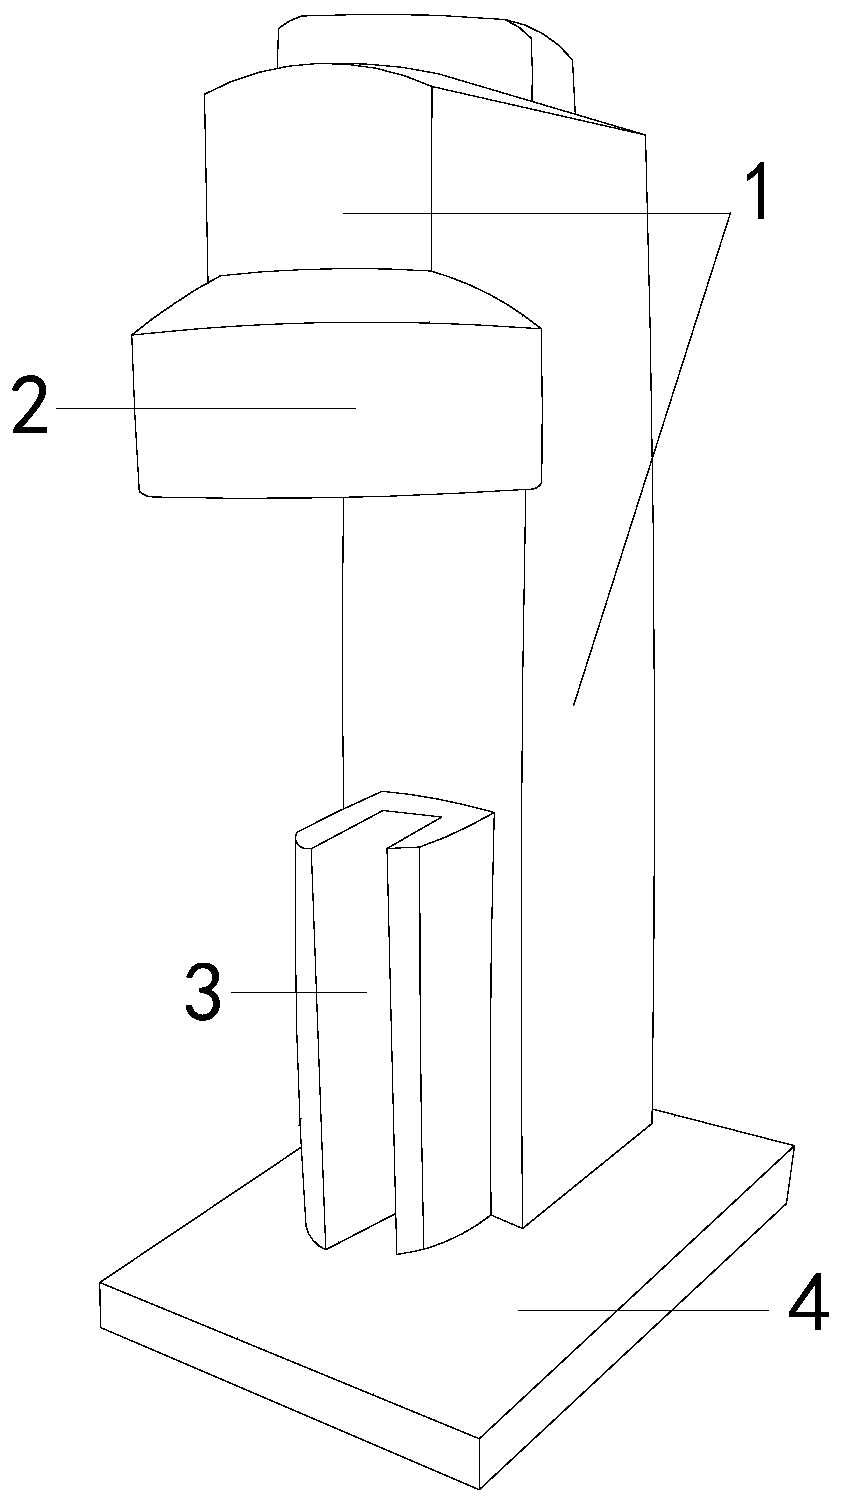 Welding device for sealing supercapacitors